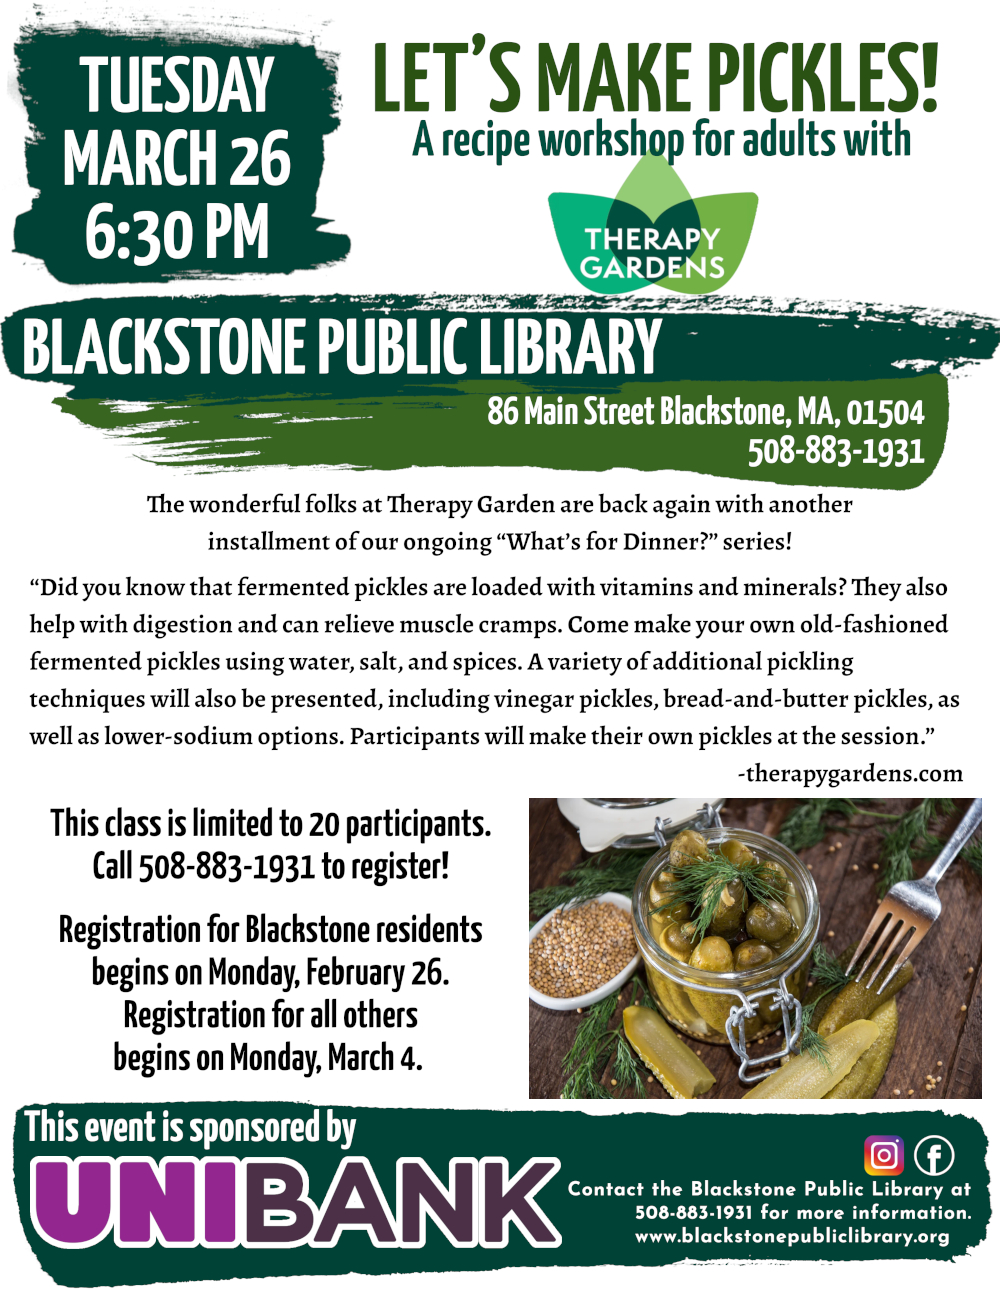 Let's Make Pickles! A recipe workshop for adults with Therapy Gardens. Tuesday, March 26, 6:30 PM.  The wonderful folks at Therapy Garden are back again with another installment of our ongoing “What’s for Dinner?” series!  “Did you know that fermented pickles are loaded with vitamins and minerals? They also help with digestion and can relieve muscle cramps. Come make your own old-fashioned fermented pickles using water, salt, and spices. A variety of additional pickling techniques will also be presented, including vinegar pickles, bread-and-butter pickles, as well as lower-sodium options. Participants will make their own pickles at the session.” -therapygardens.com  Flyer features a photo of a jar of fresh pickles resting on a wooden table. The jar is open, with some cut pickles on the table beside it, and a fork. Beside the jar is a small plate of mustard seeds. Fresh sprigs of dill are scattered around them all.  This class is limited to 20 participants. Call 508-883-1931 to register! Registration for Blackstone residents begins on Monday, February 26. Registration for all others begins on Monday, March 4.  Call the Blackstone Public Library at 508-883-1931 for more information.  This event is sponsored by Unibank.